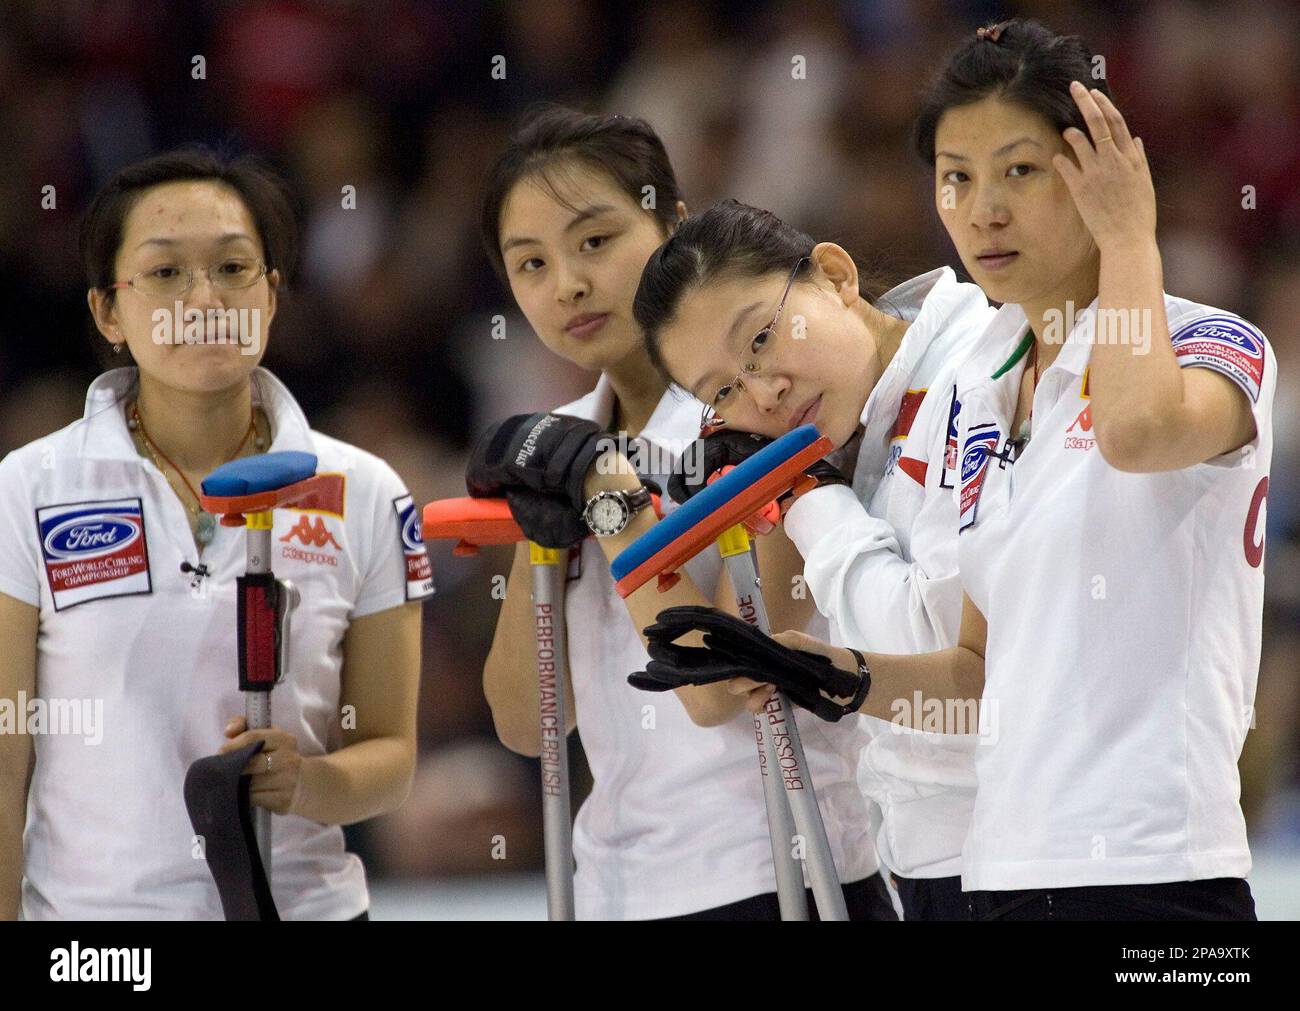 From left, Chinas lead Yan Zhou, second Qingshuang Yue, skip Bingyu Wang and third Yin Liu watch Team Canada during a timeout in the gold medal game at the womens World Curling